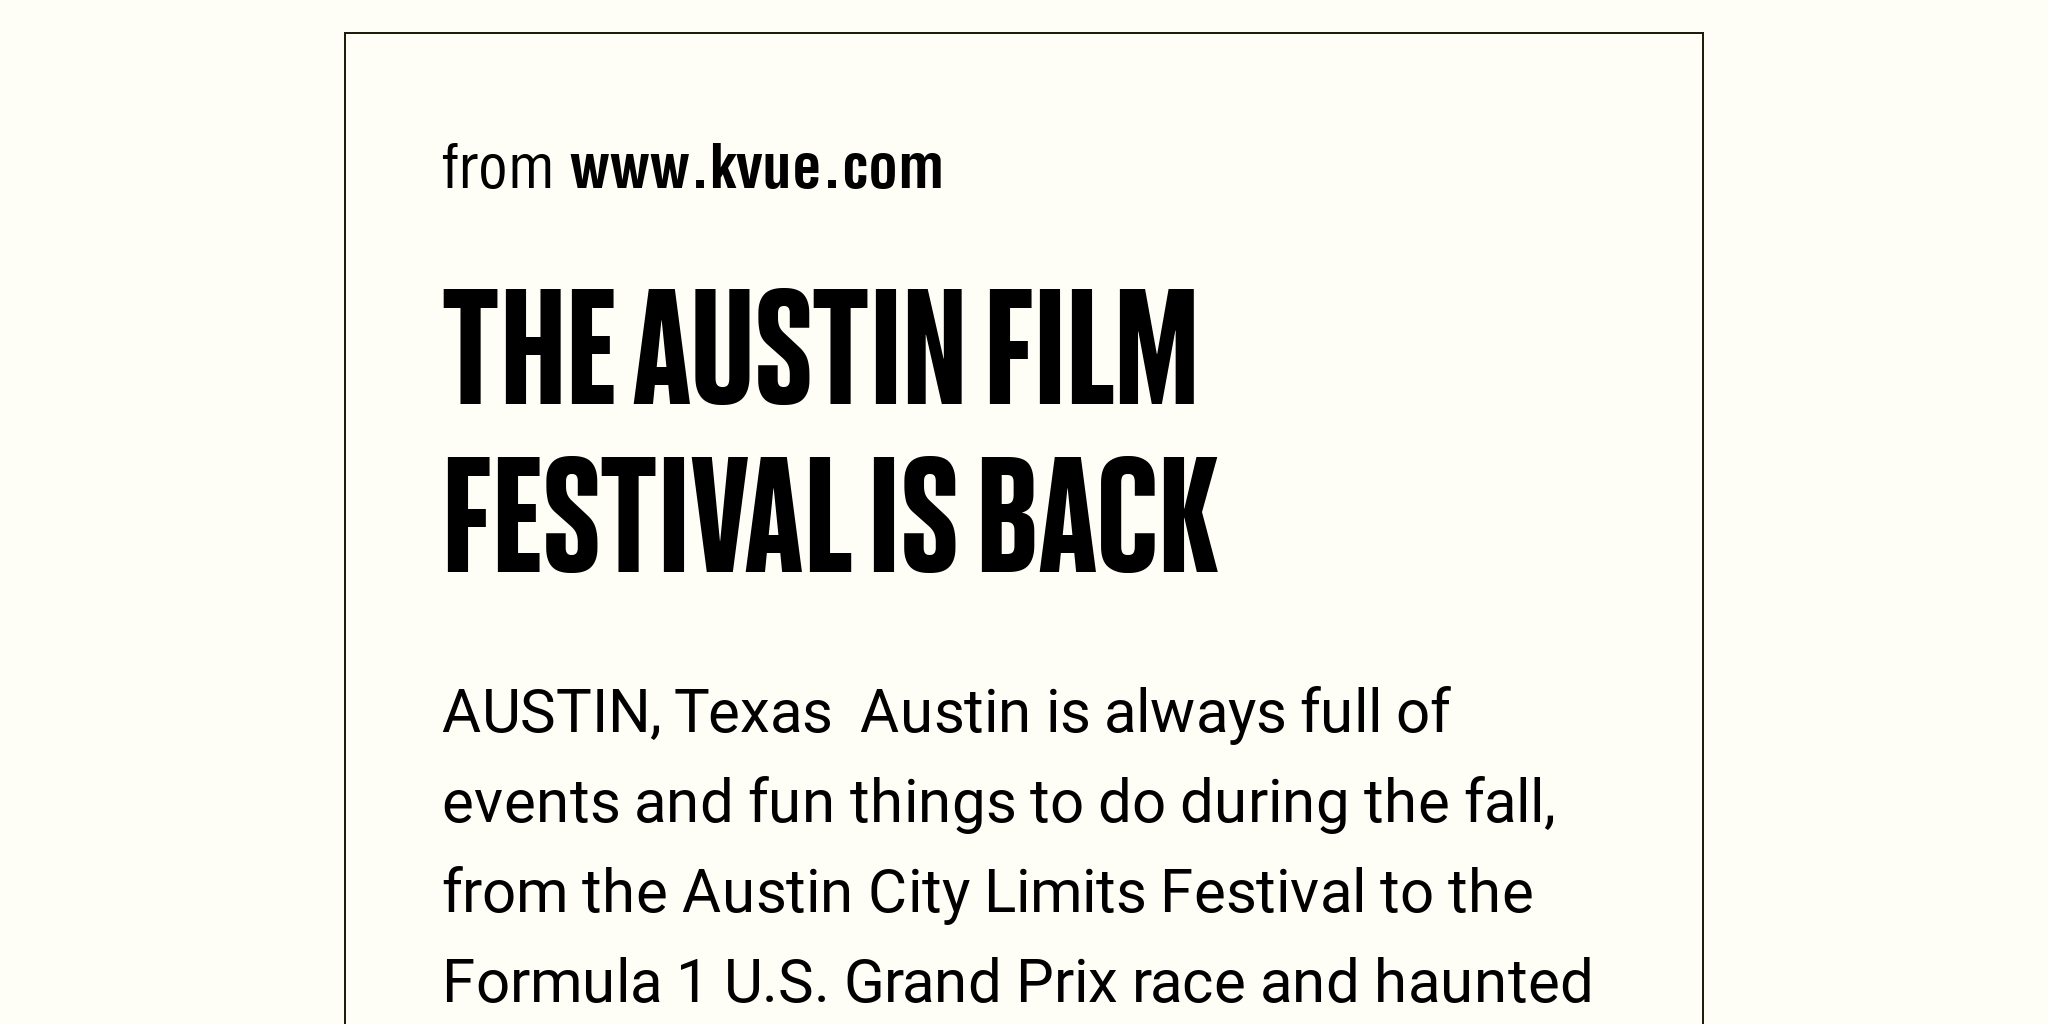 The Austin Film Festival is back Briefly